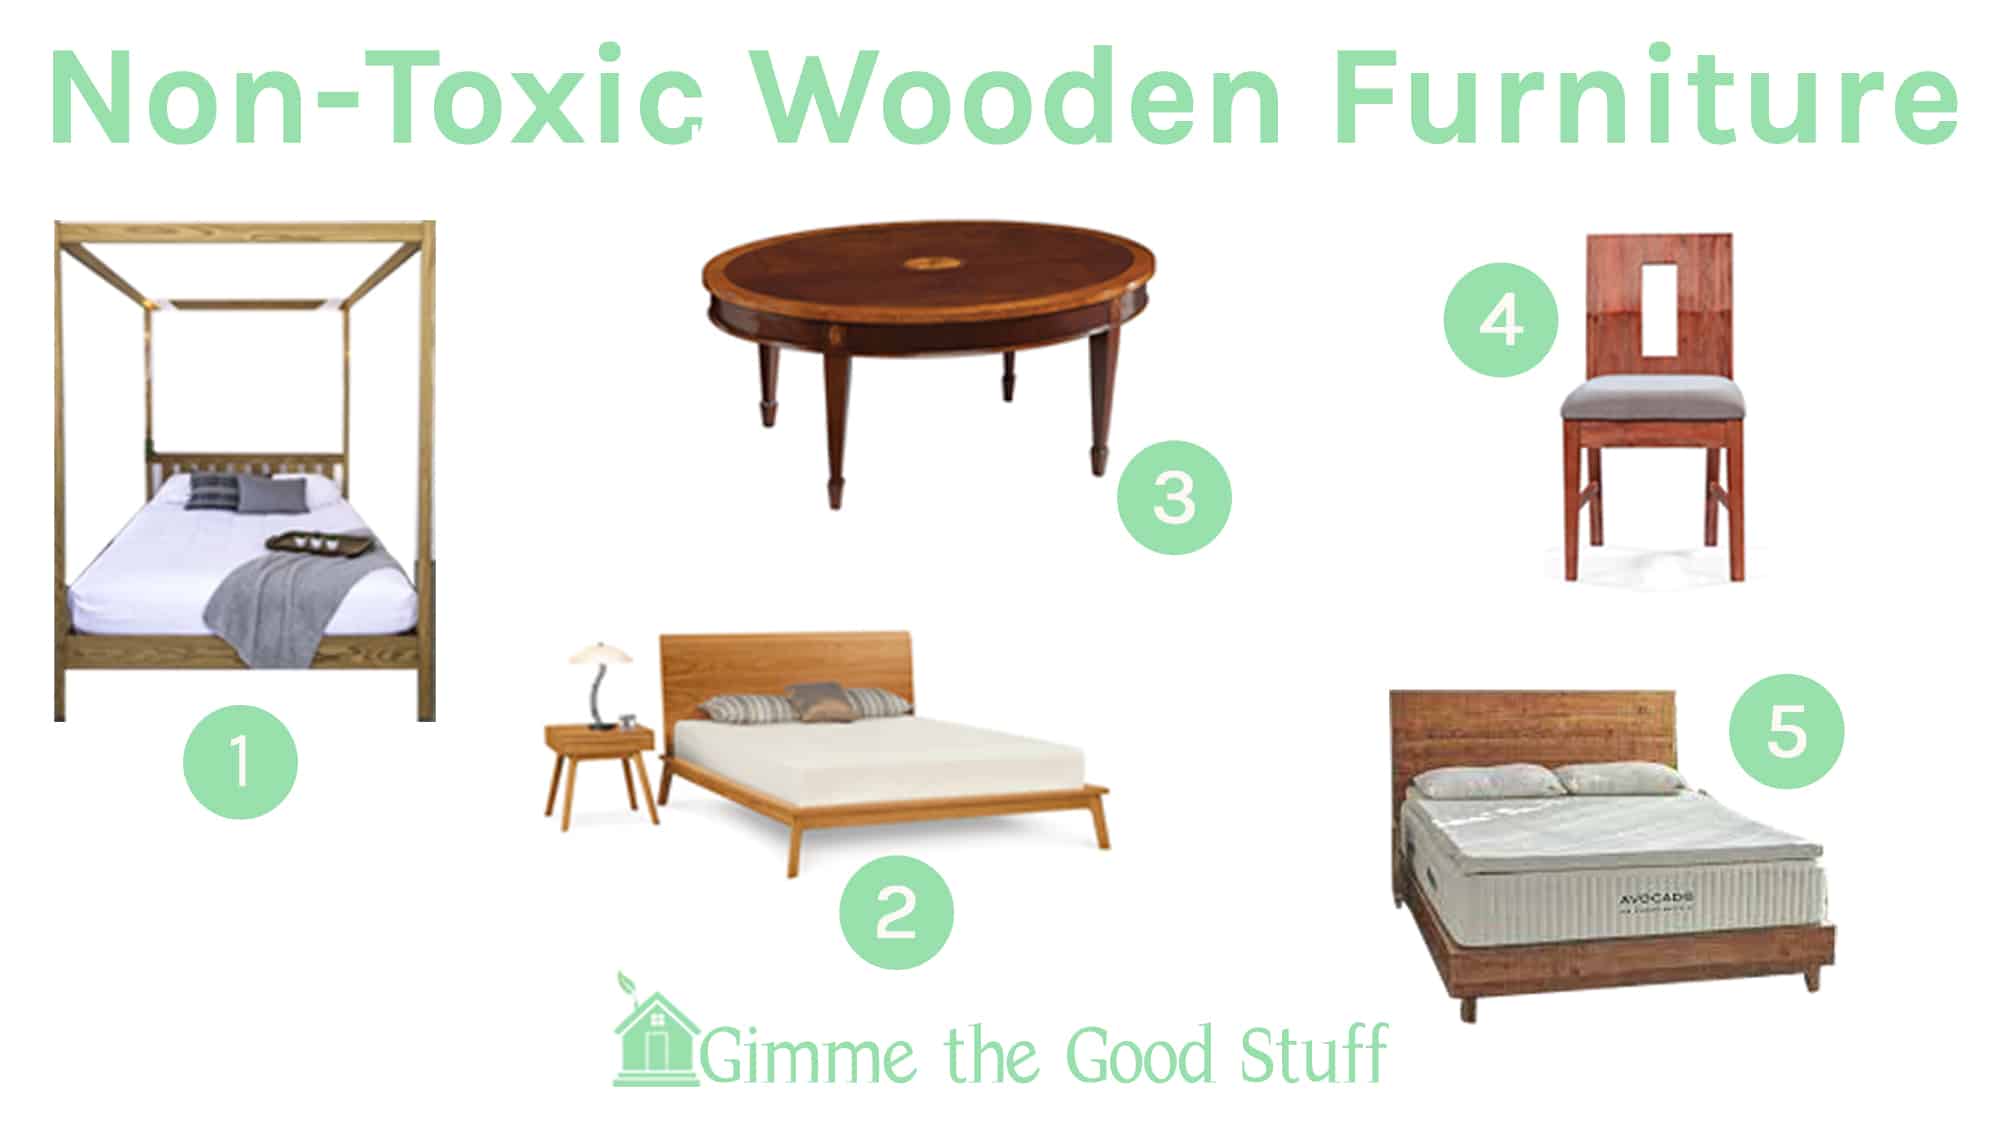 Wooden Furniture New Web Size